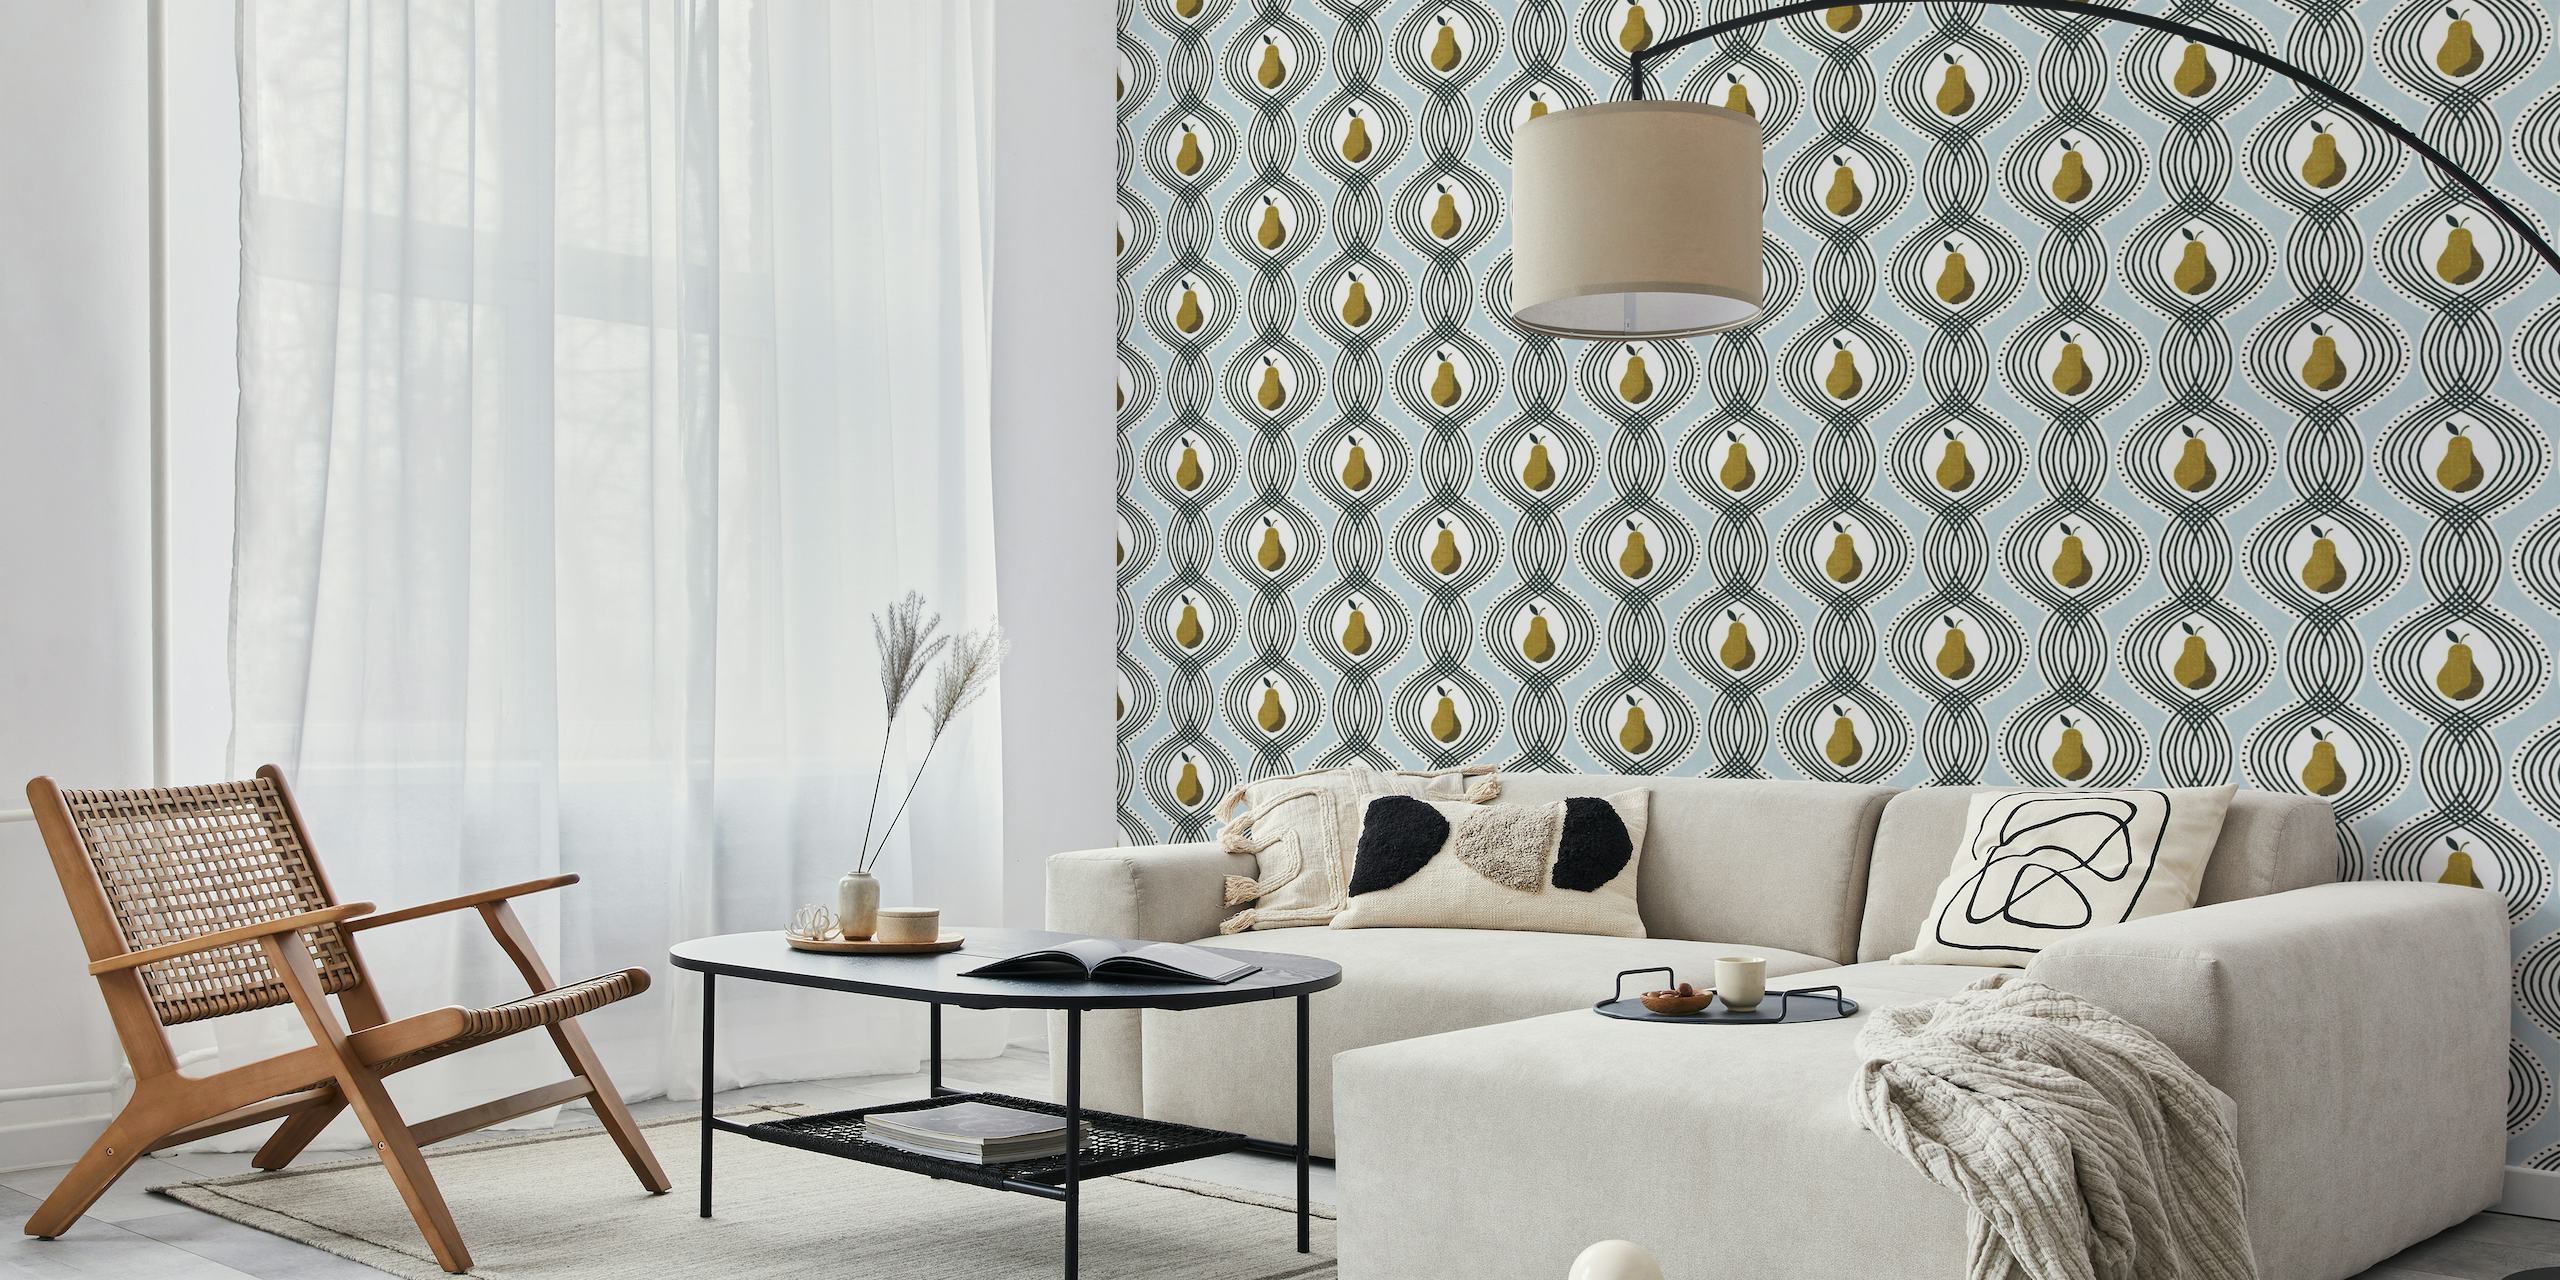 Lindie blue patterned wall mural with stylized pears and undulating lines